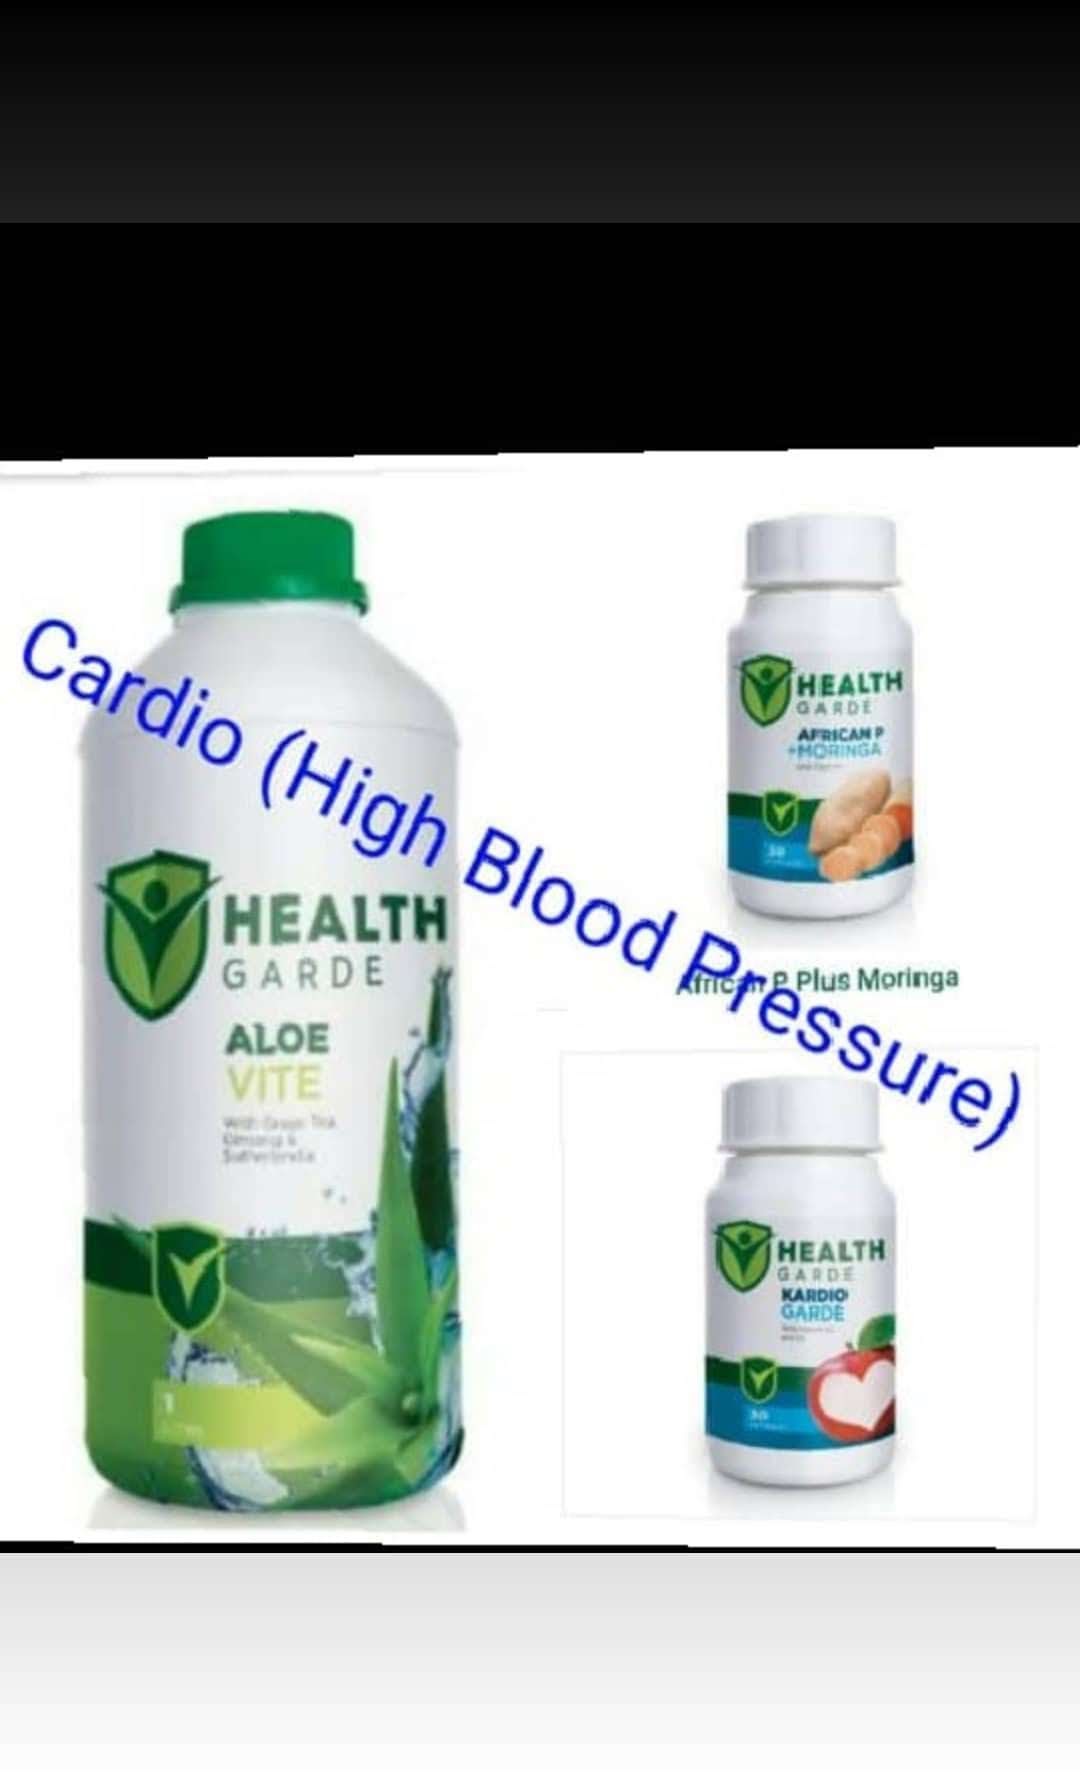 High blood pressure is not a good deal try herbal